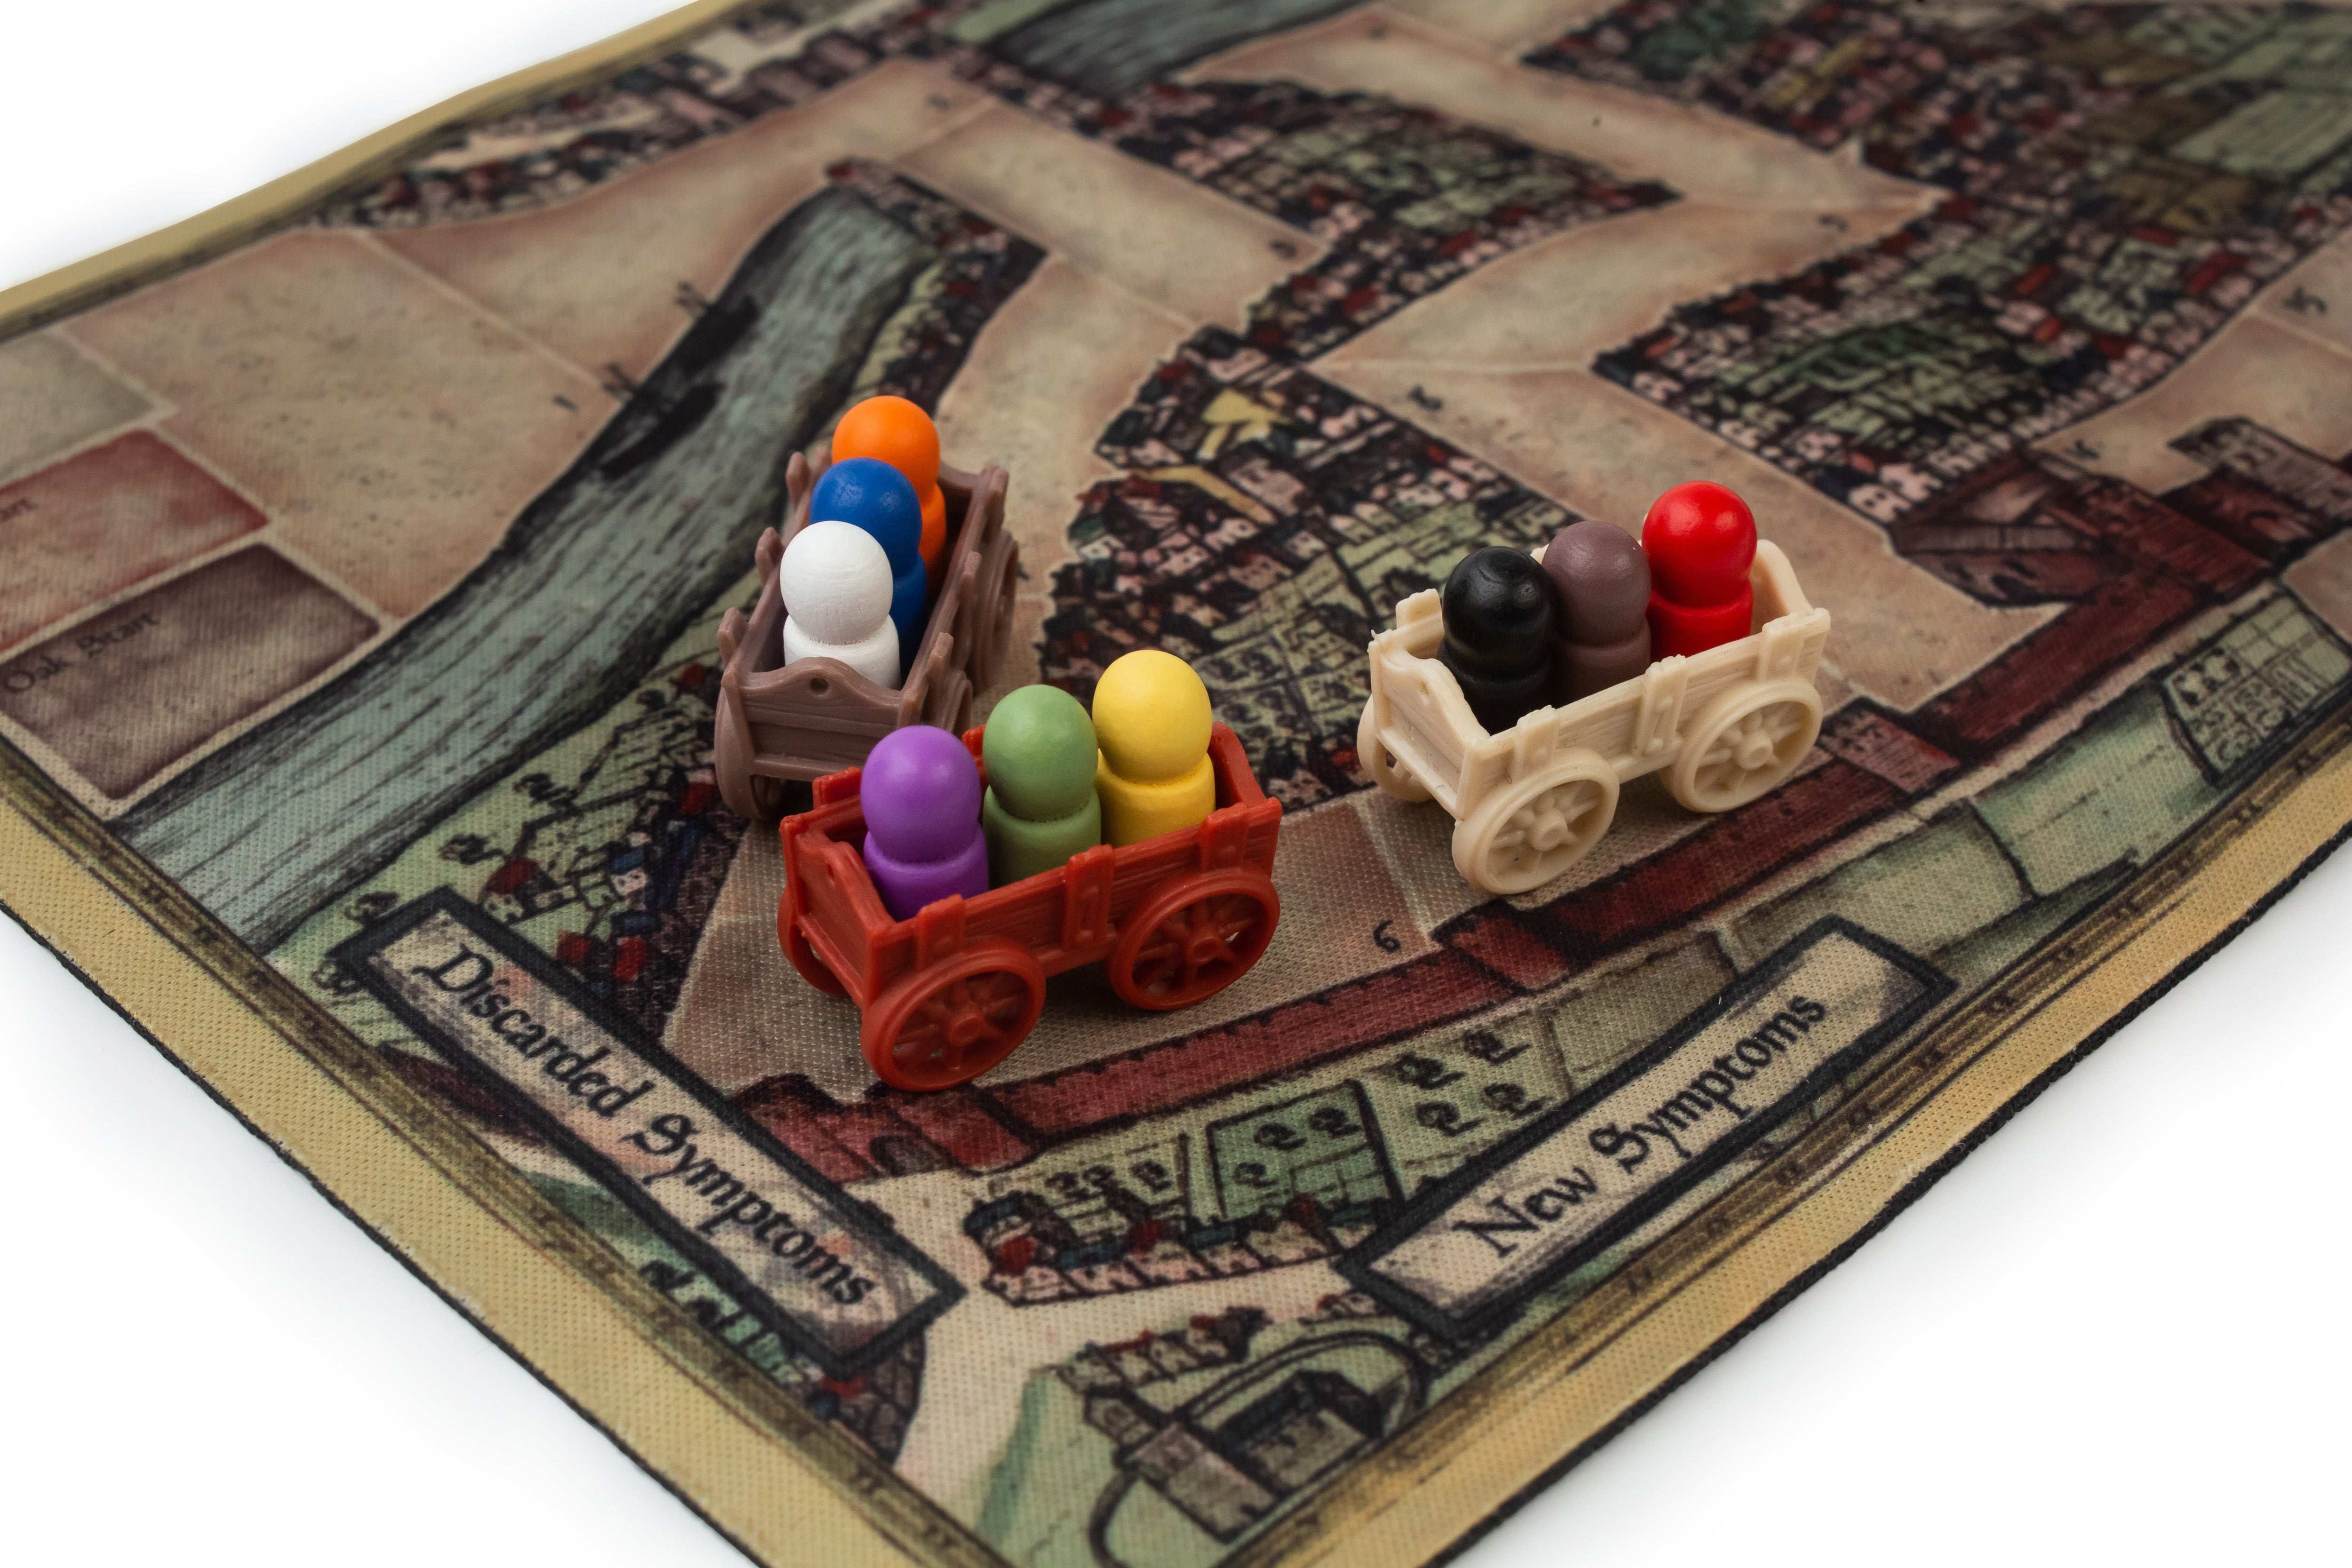  Bristol 1350 Board Game of Strategy, Deceit, and Luck for 1-9  Players : Toys & Games